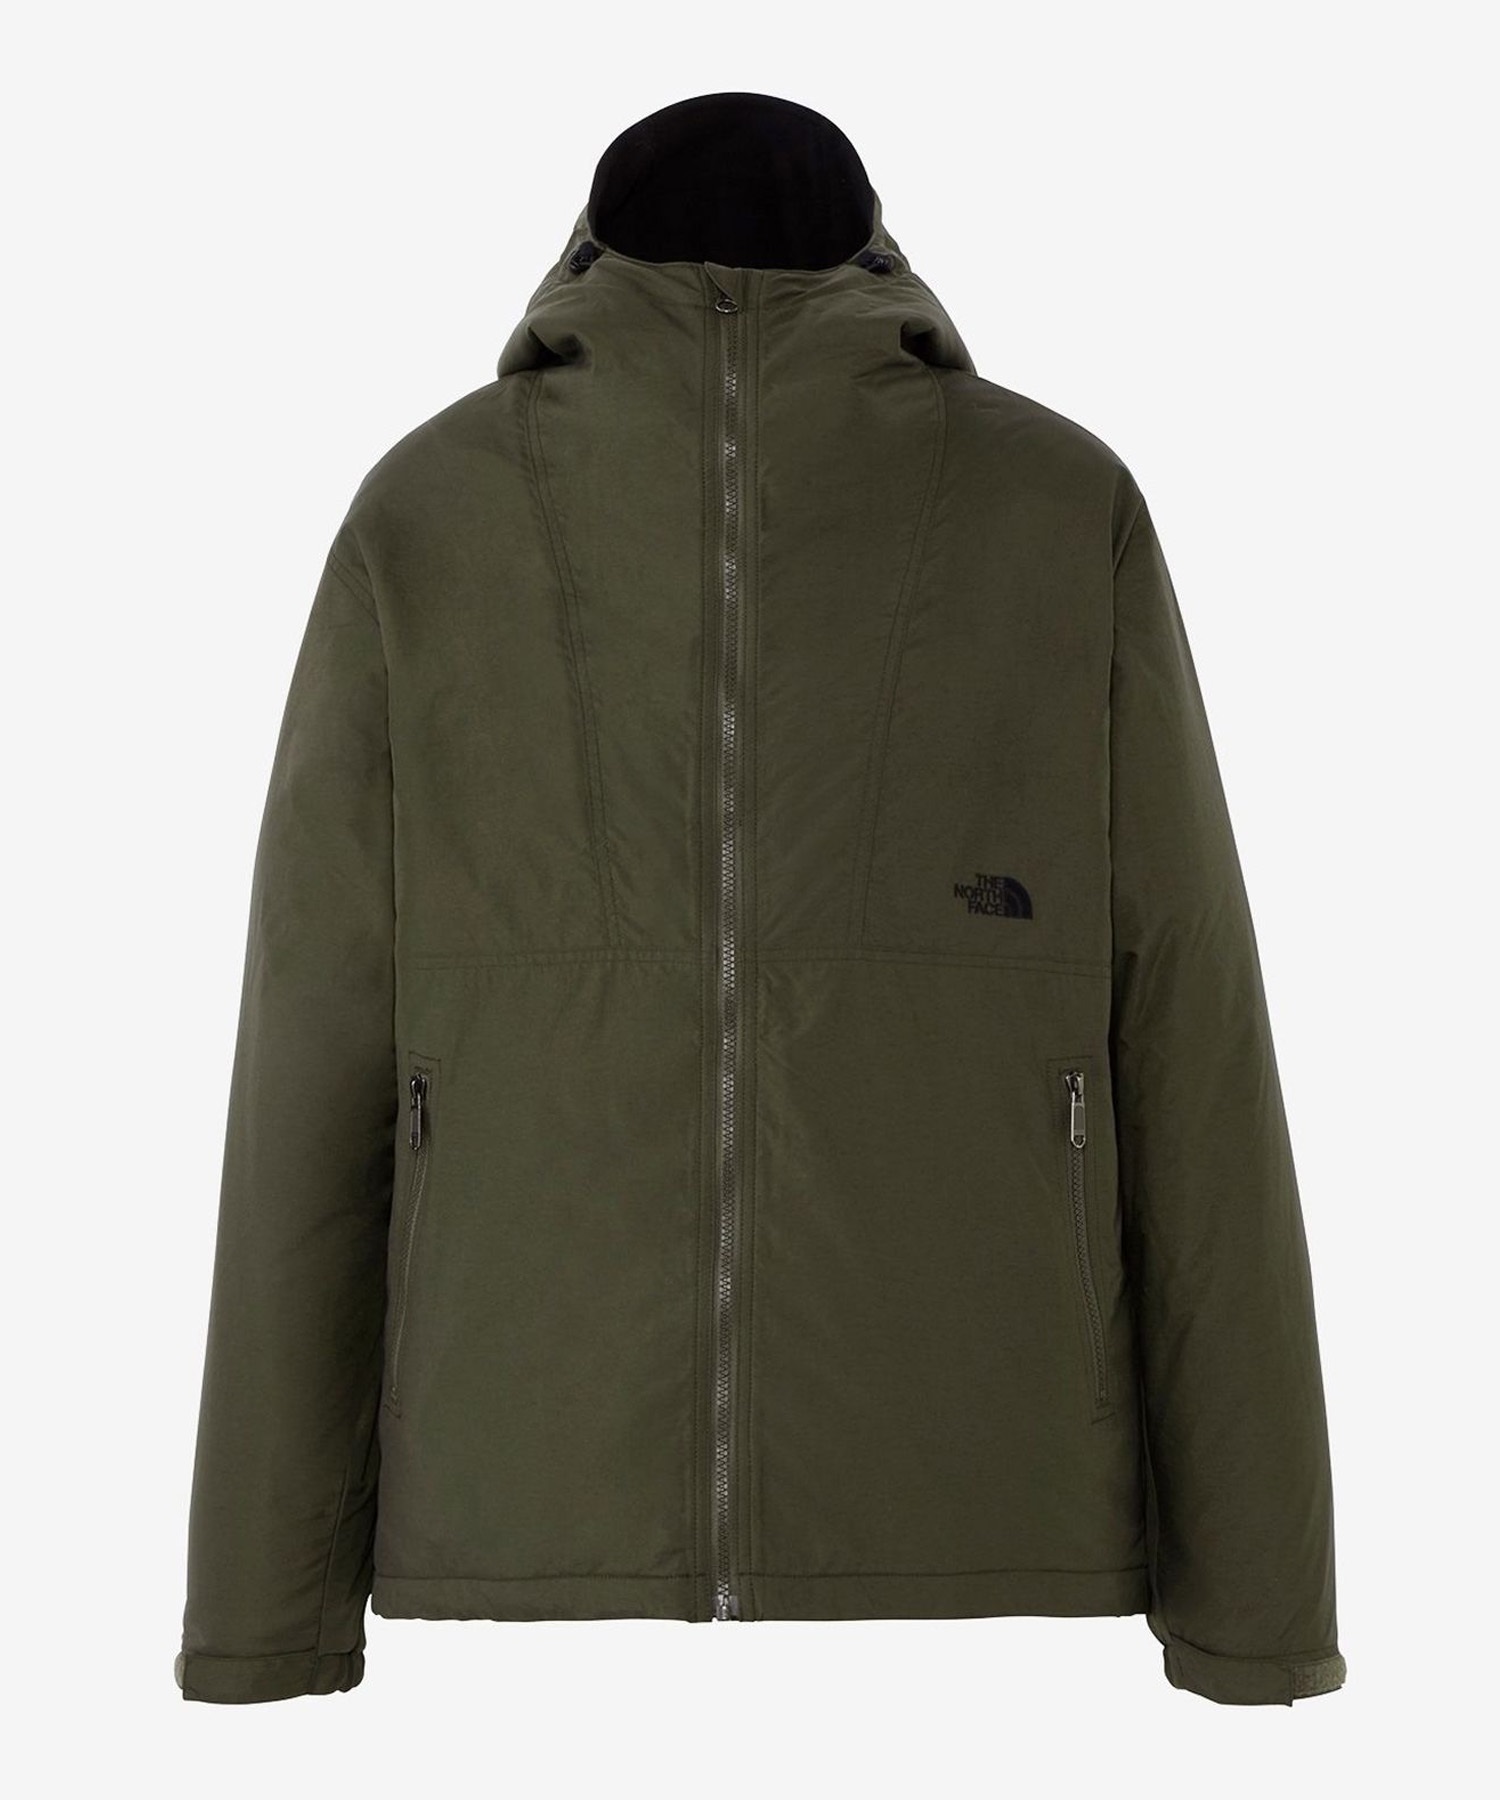 THE NORTH FACE/ザ・ノース・フェイス Compact Nomad Jacket